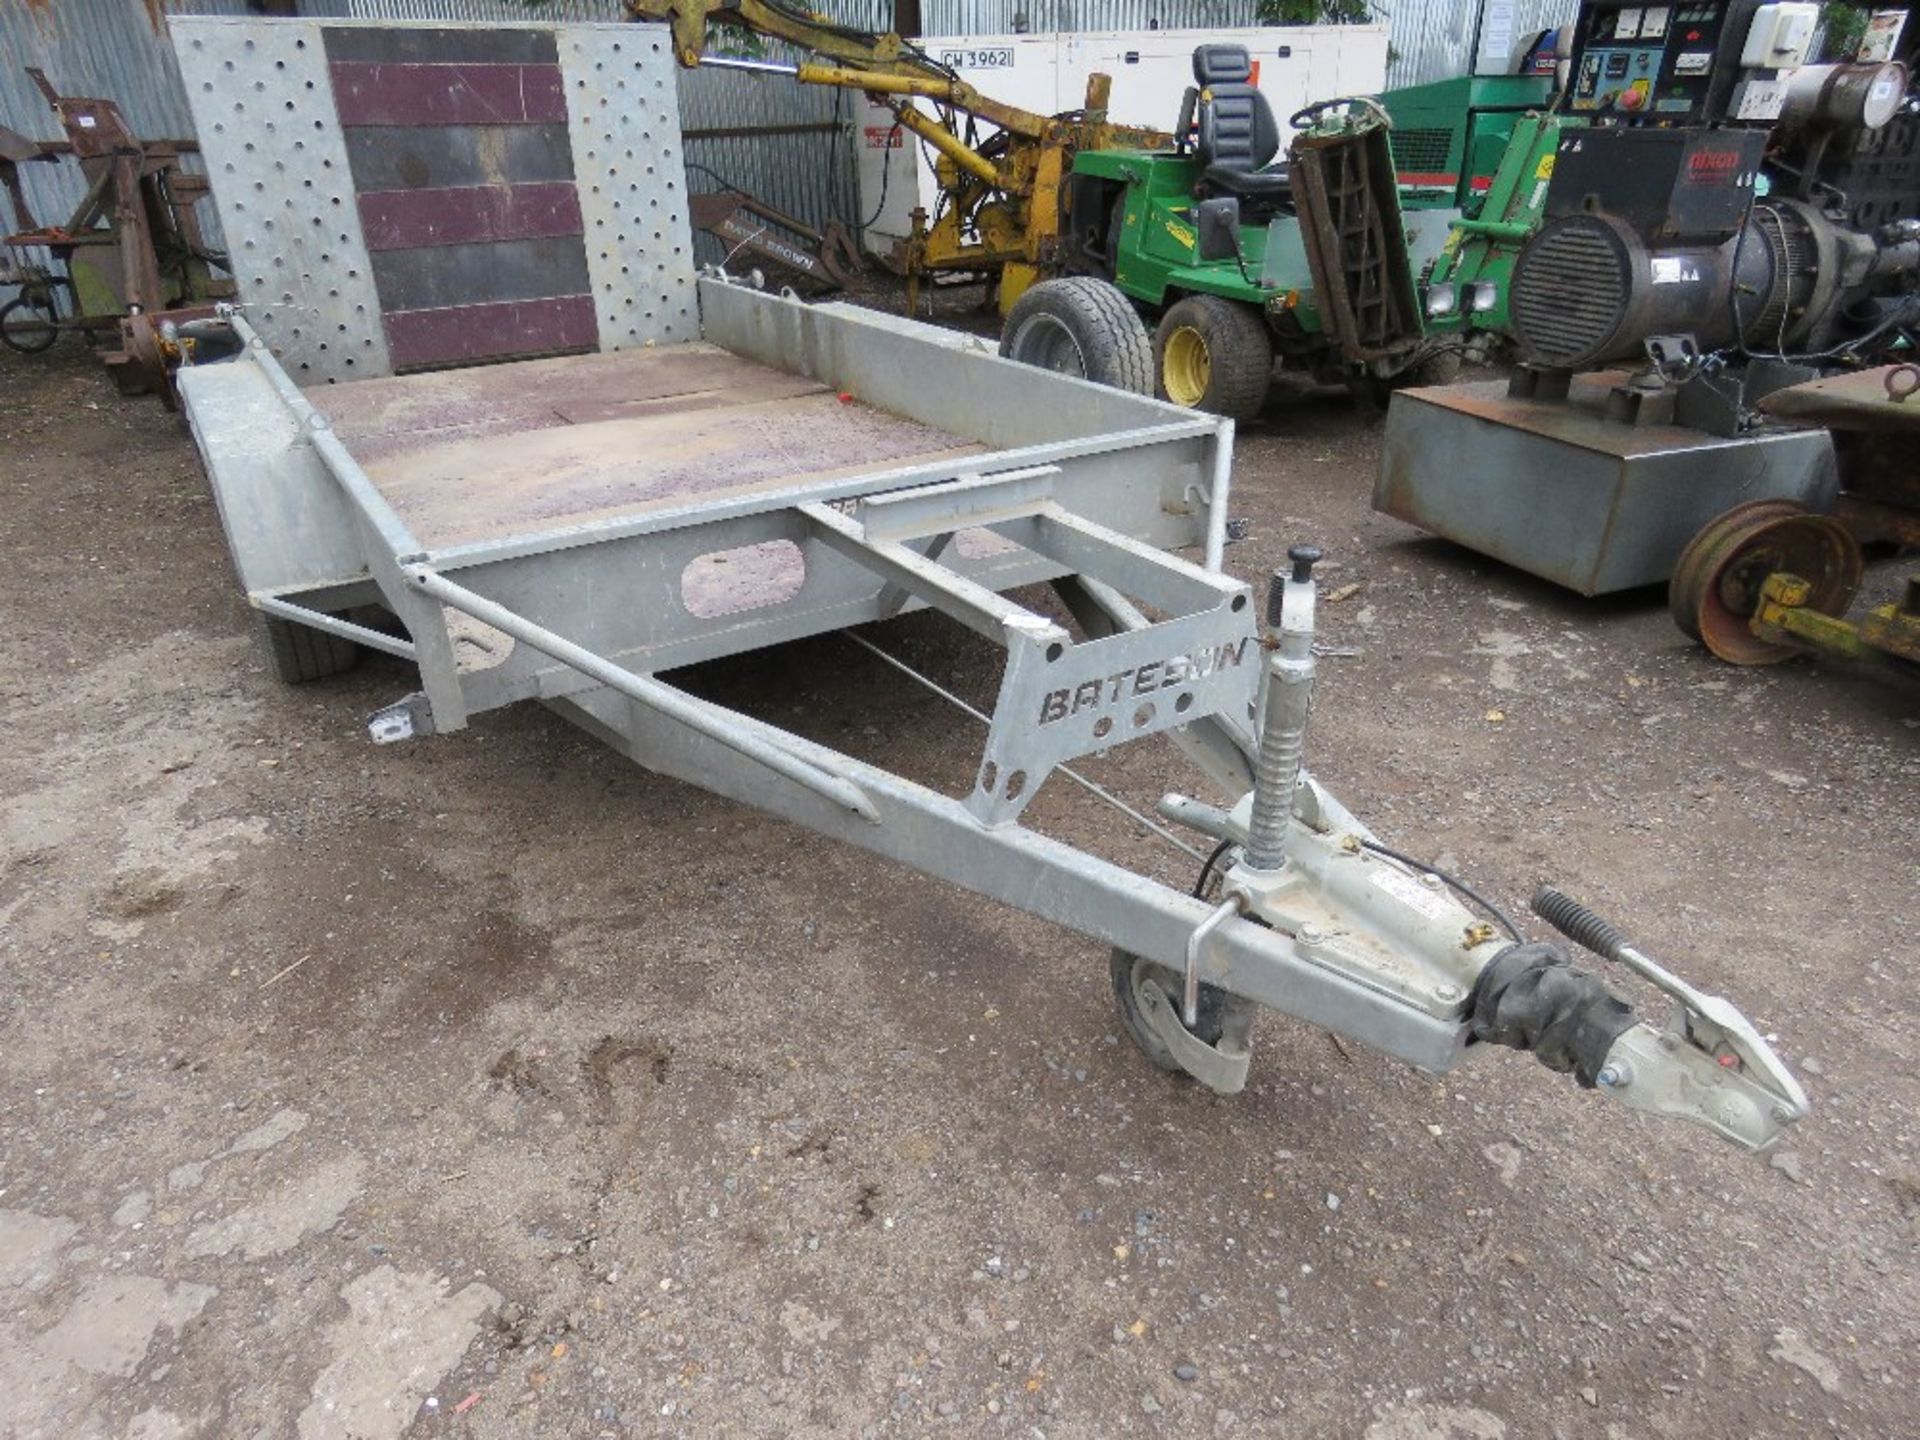 BATESON 3500KG RATED HEAVY DUTY PLANT TRAILER, INTERNAL SIZE 5.5FT X 9FT 6" APPROX - Image 3 of 8